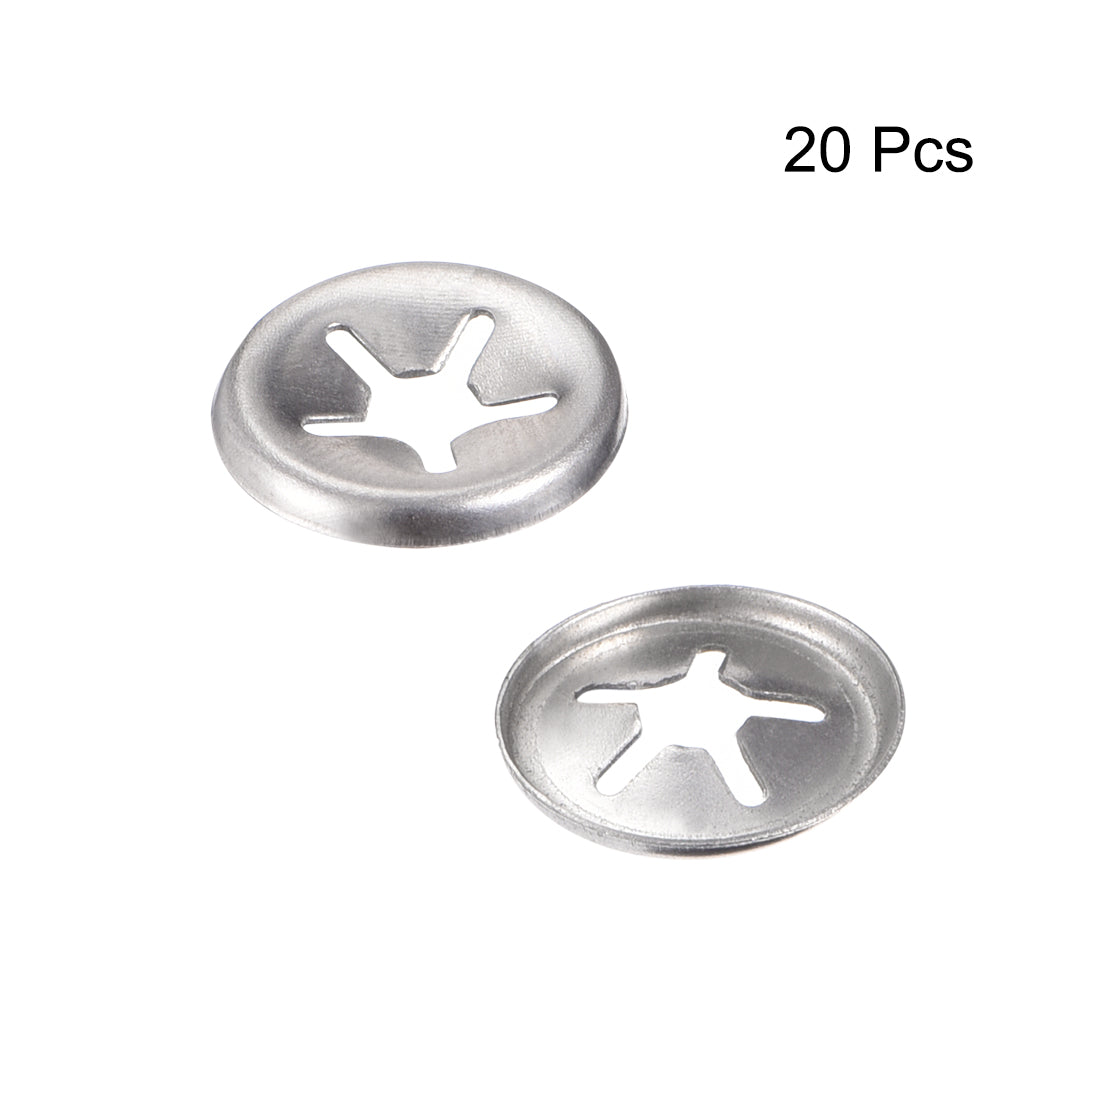 Uxcell Uxcell M12 Internal Tooth Star Locking Washer 11.2mm I.D. 24.5mm O.D. Lock Washers Push On Locking Speed Clip, 304 Stainless Steel 20pcs